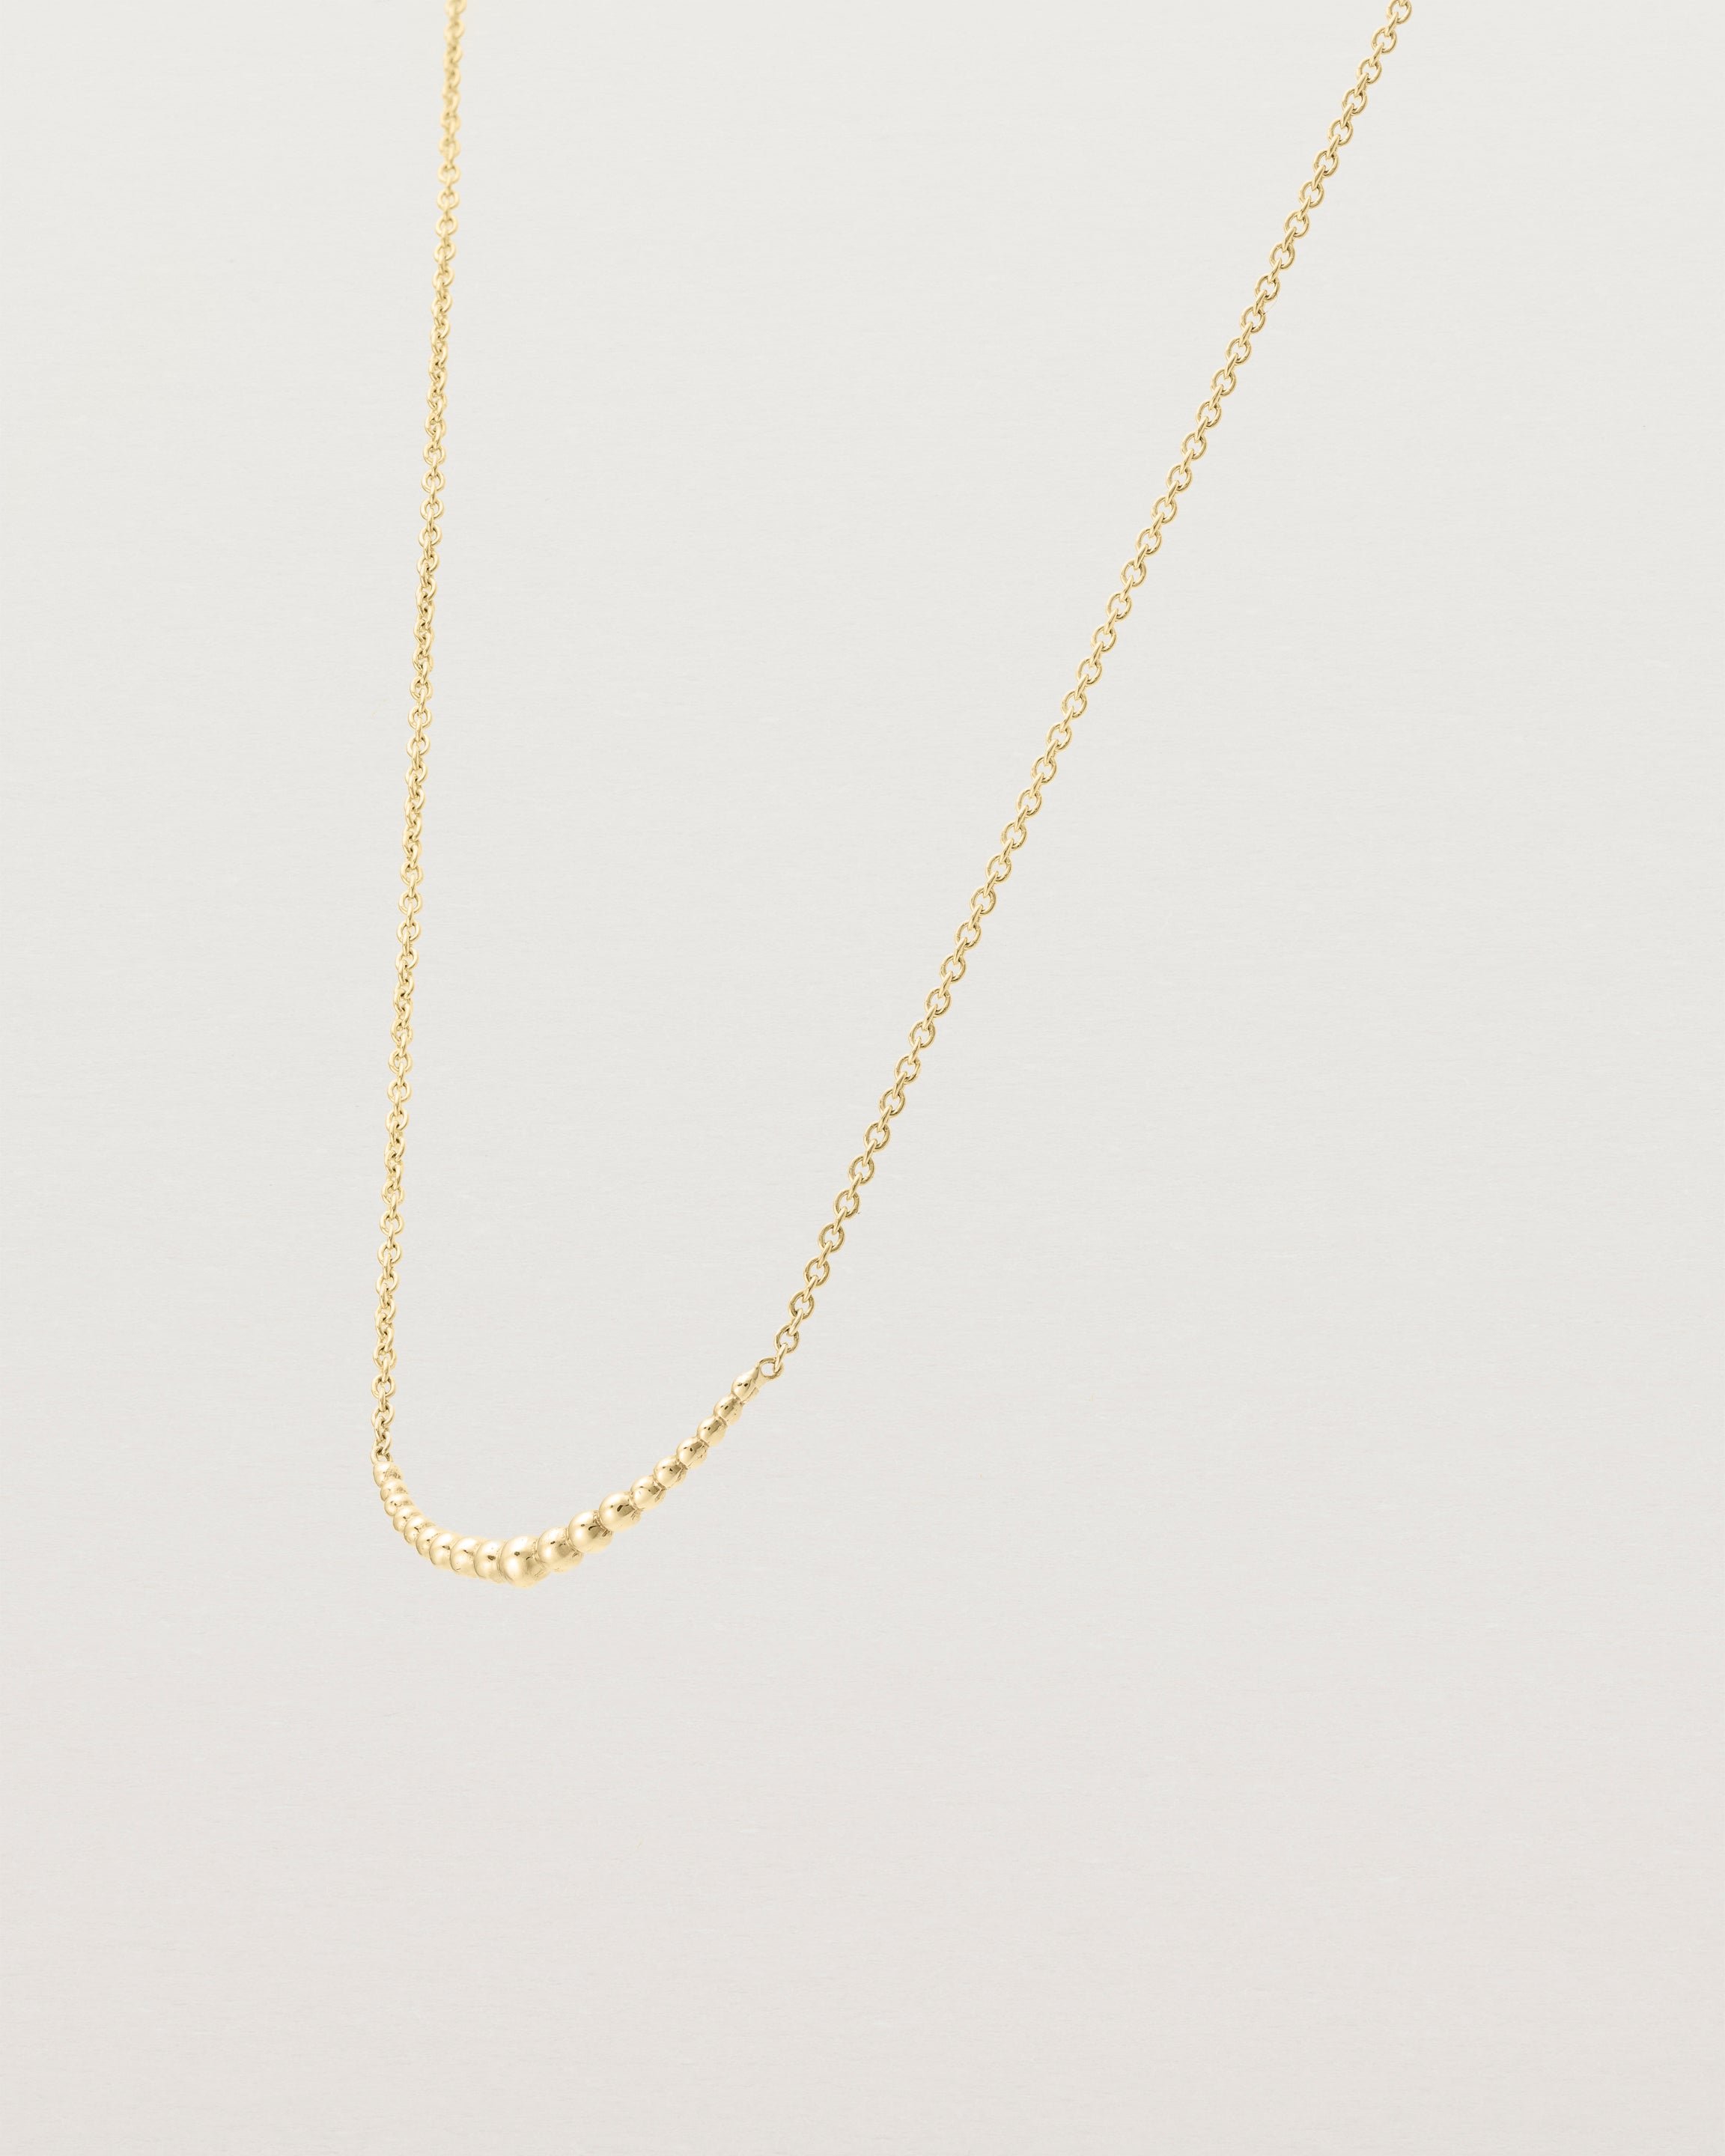 Angled view of the Crescent Necklace in yellow gold.